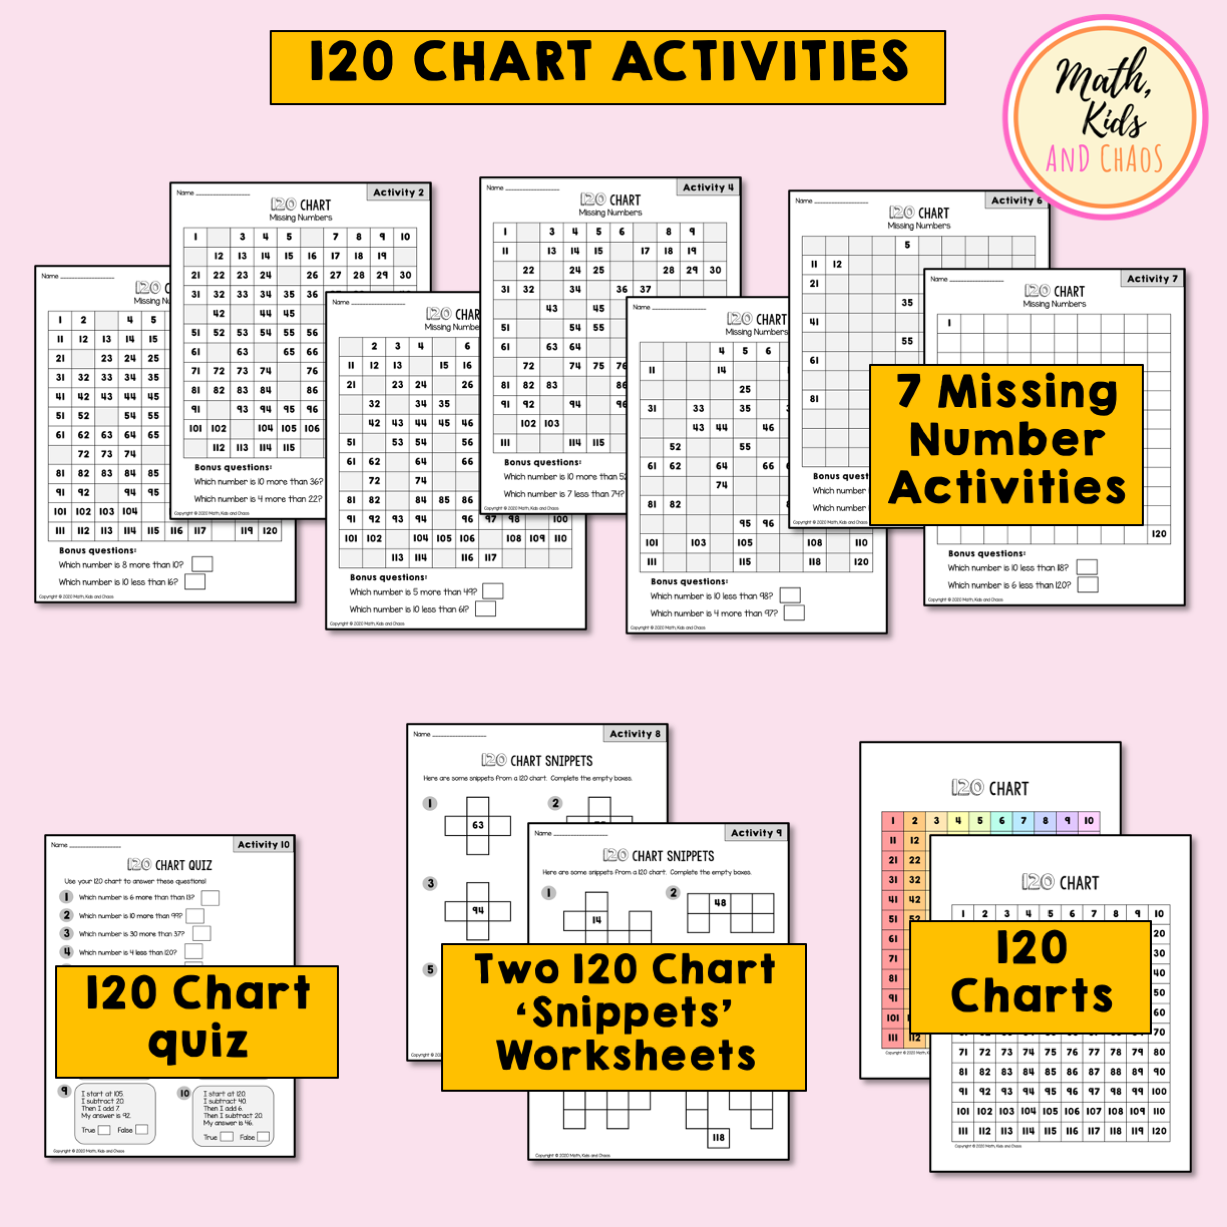 100 and 120 Chart: Missing Number Activities